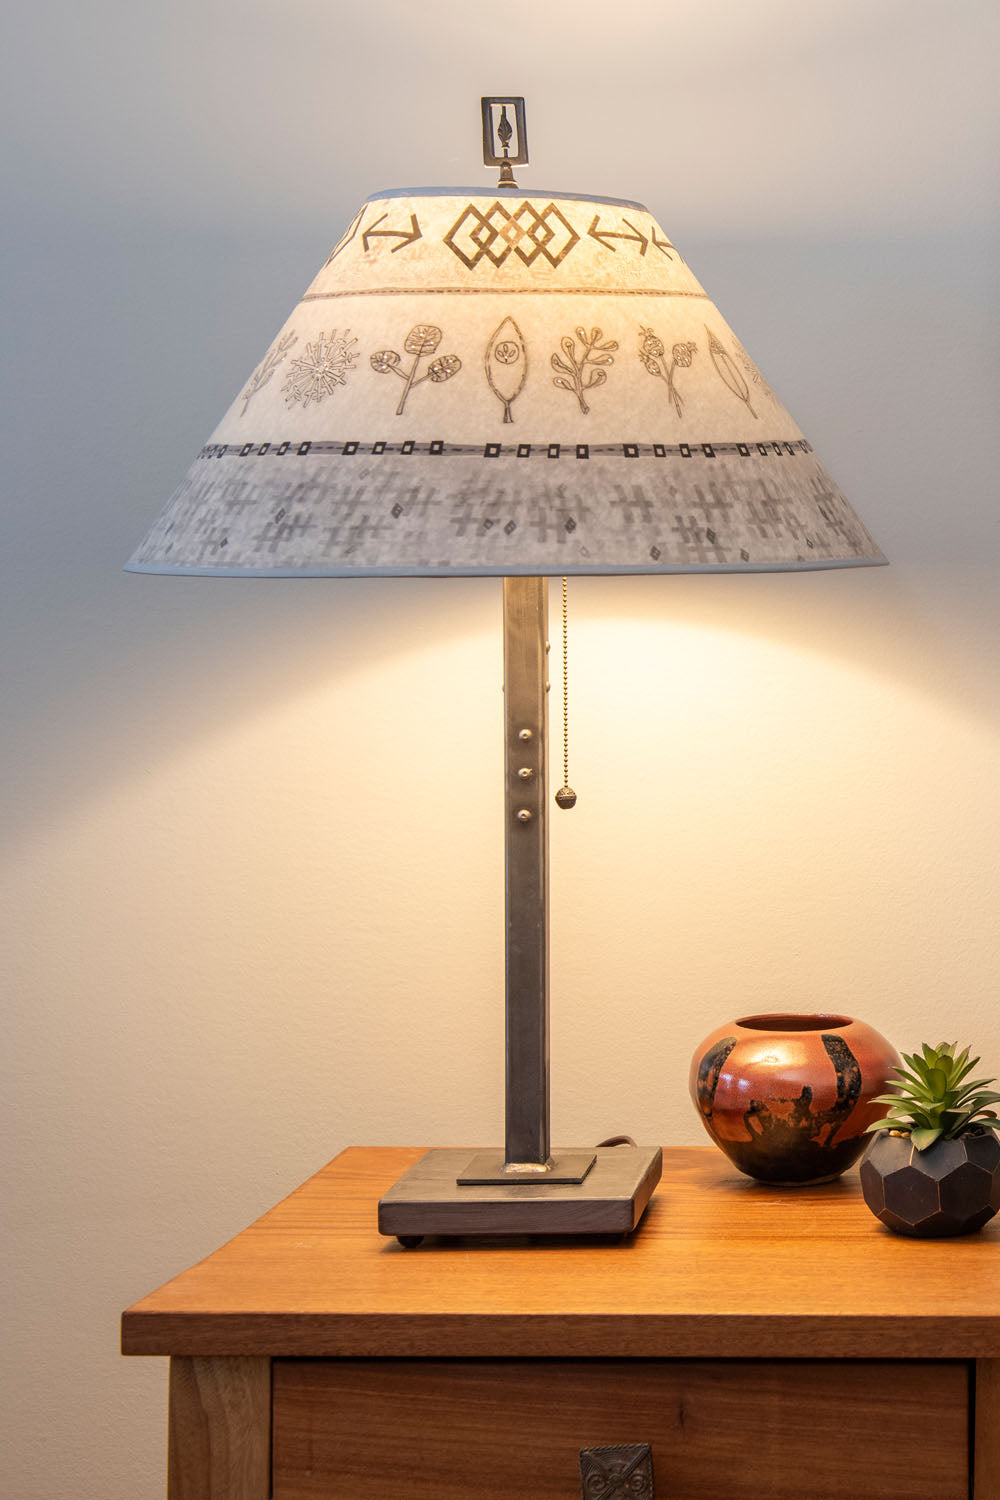 Janna Ugone &amp; Co Table Lamp Steel Table Lamp with Large Conical Shade in Woven &amp; Sprig in Mist